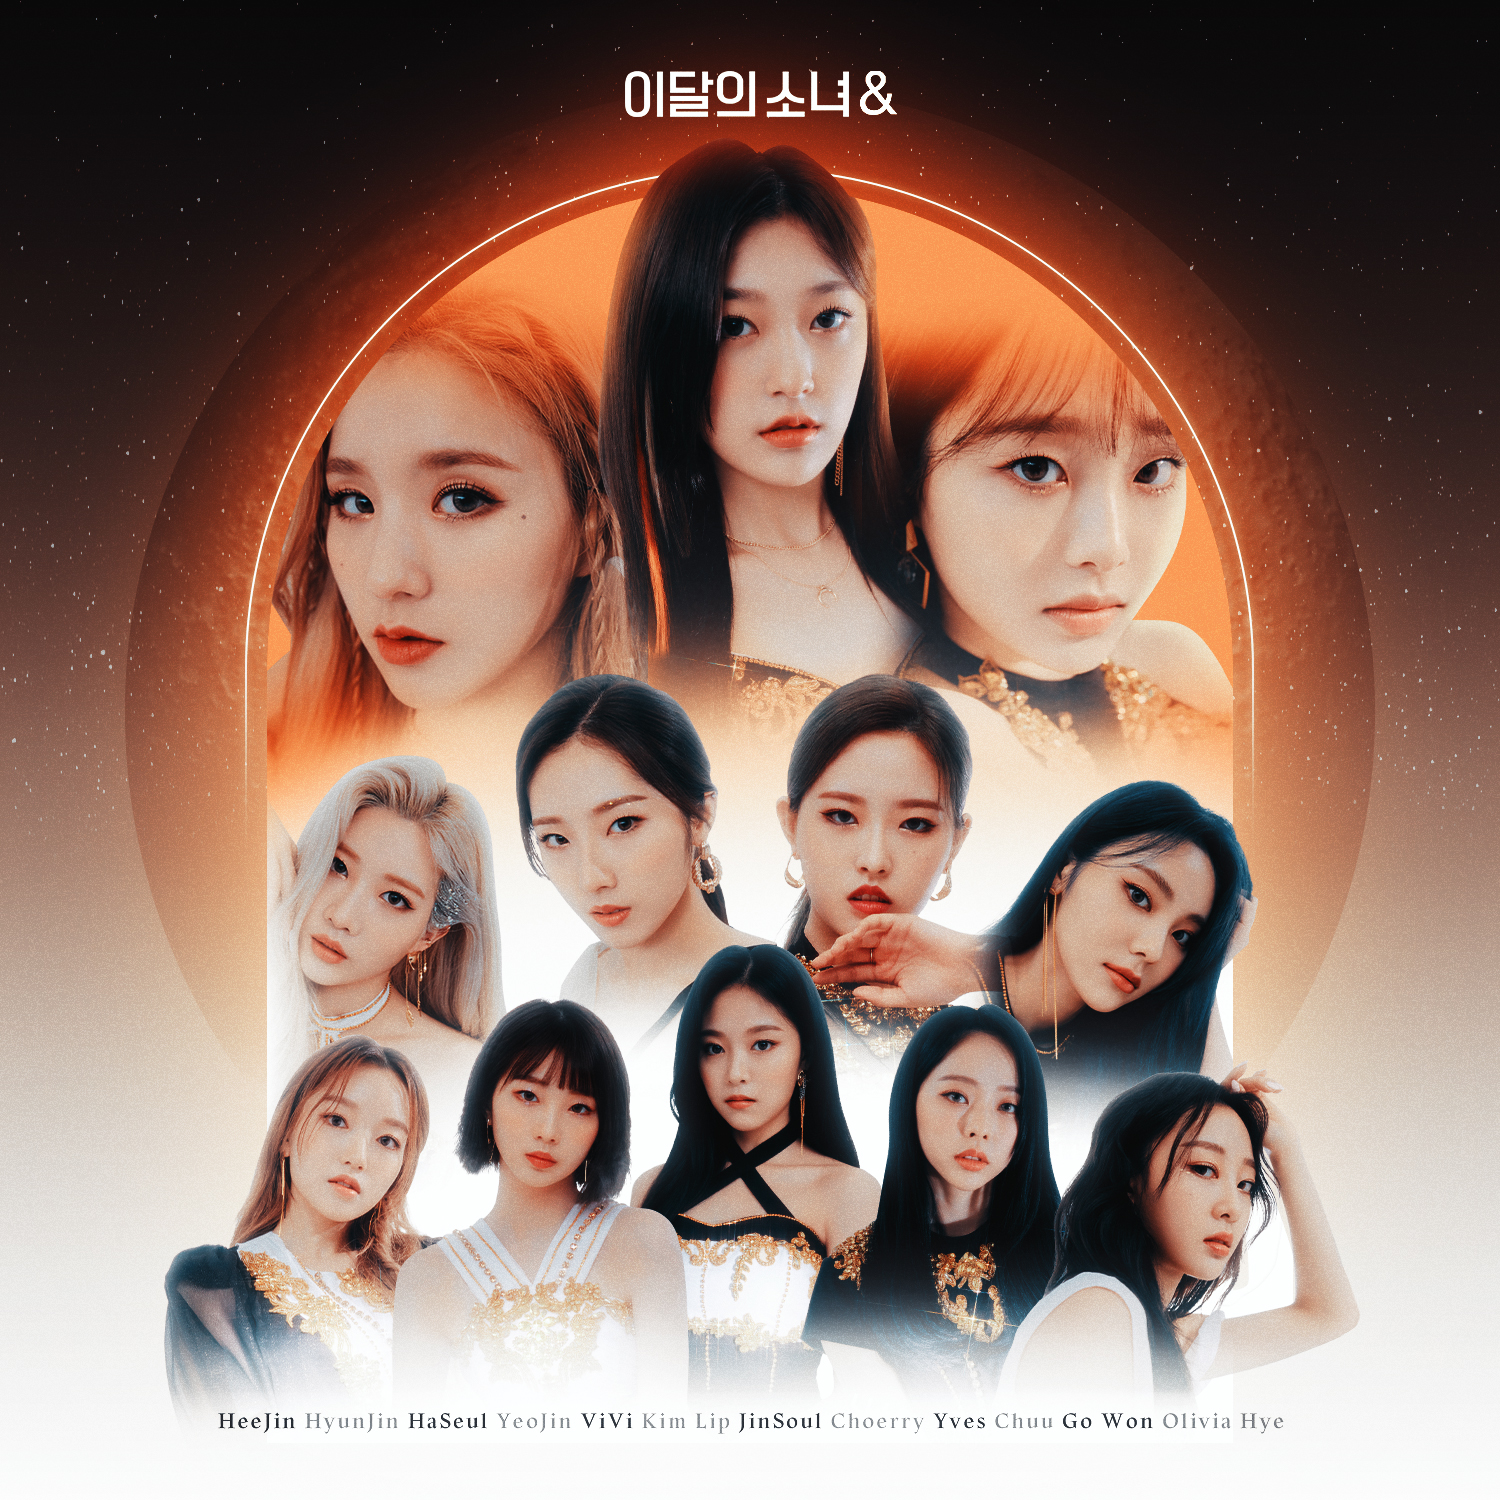 LOONA - The 4th Mini Album [AND] (PTT) by VincereVIII on DeviantArt